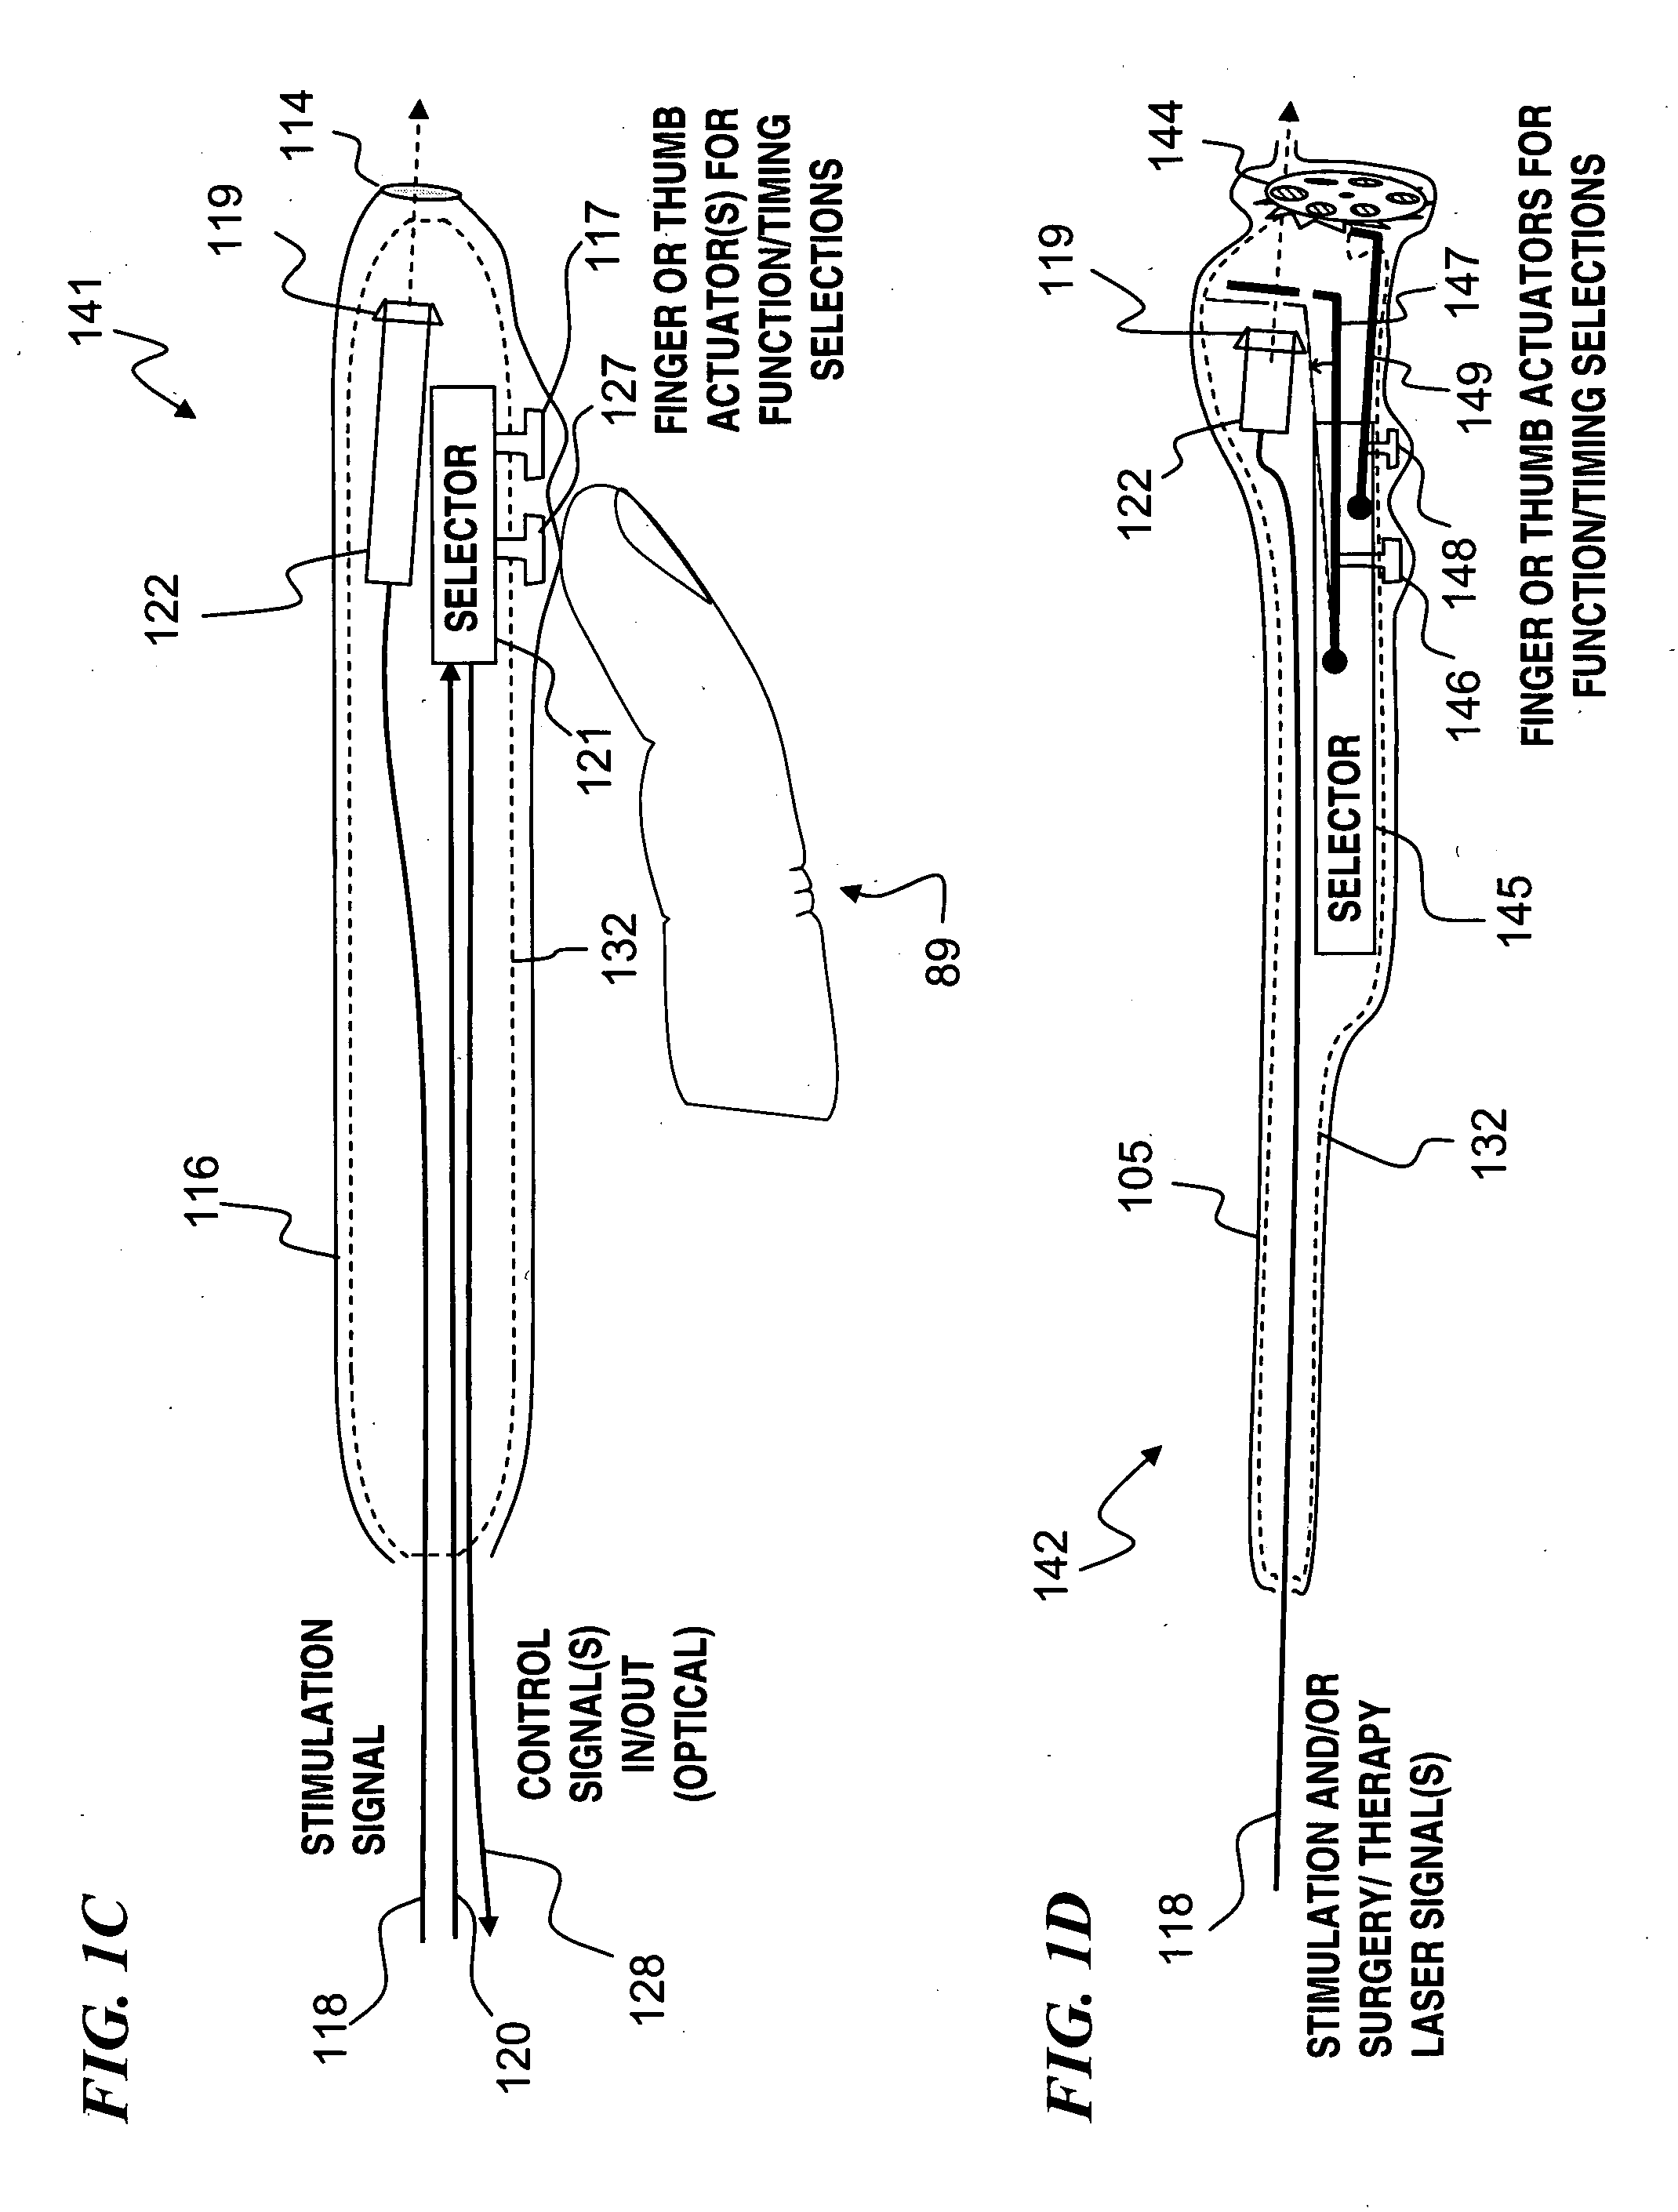 Apparatus and method for optical stimulation of nerves and other animal tissue